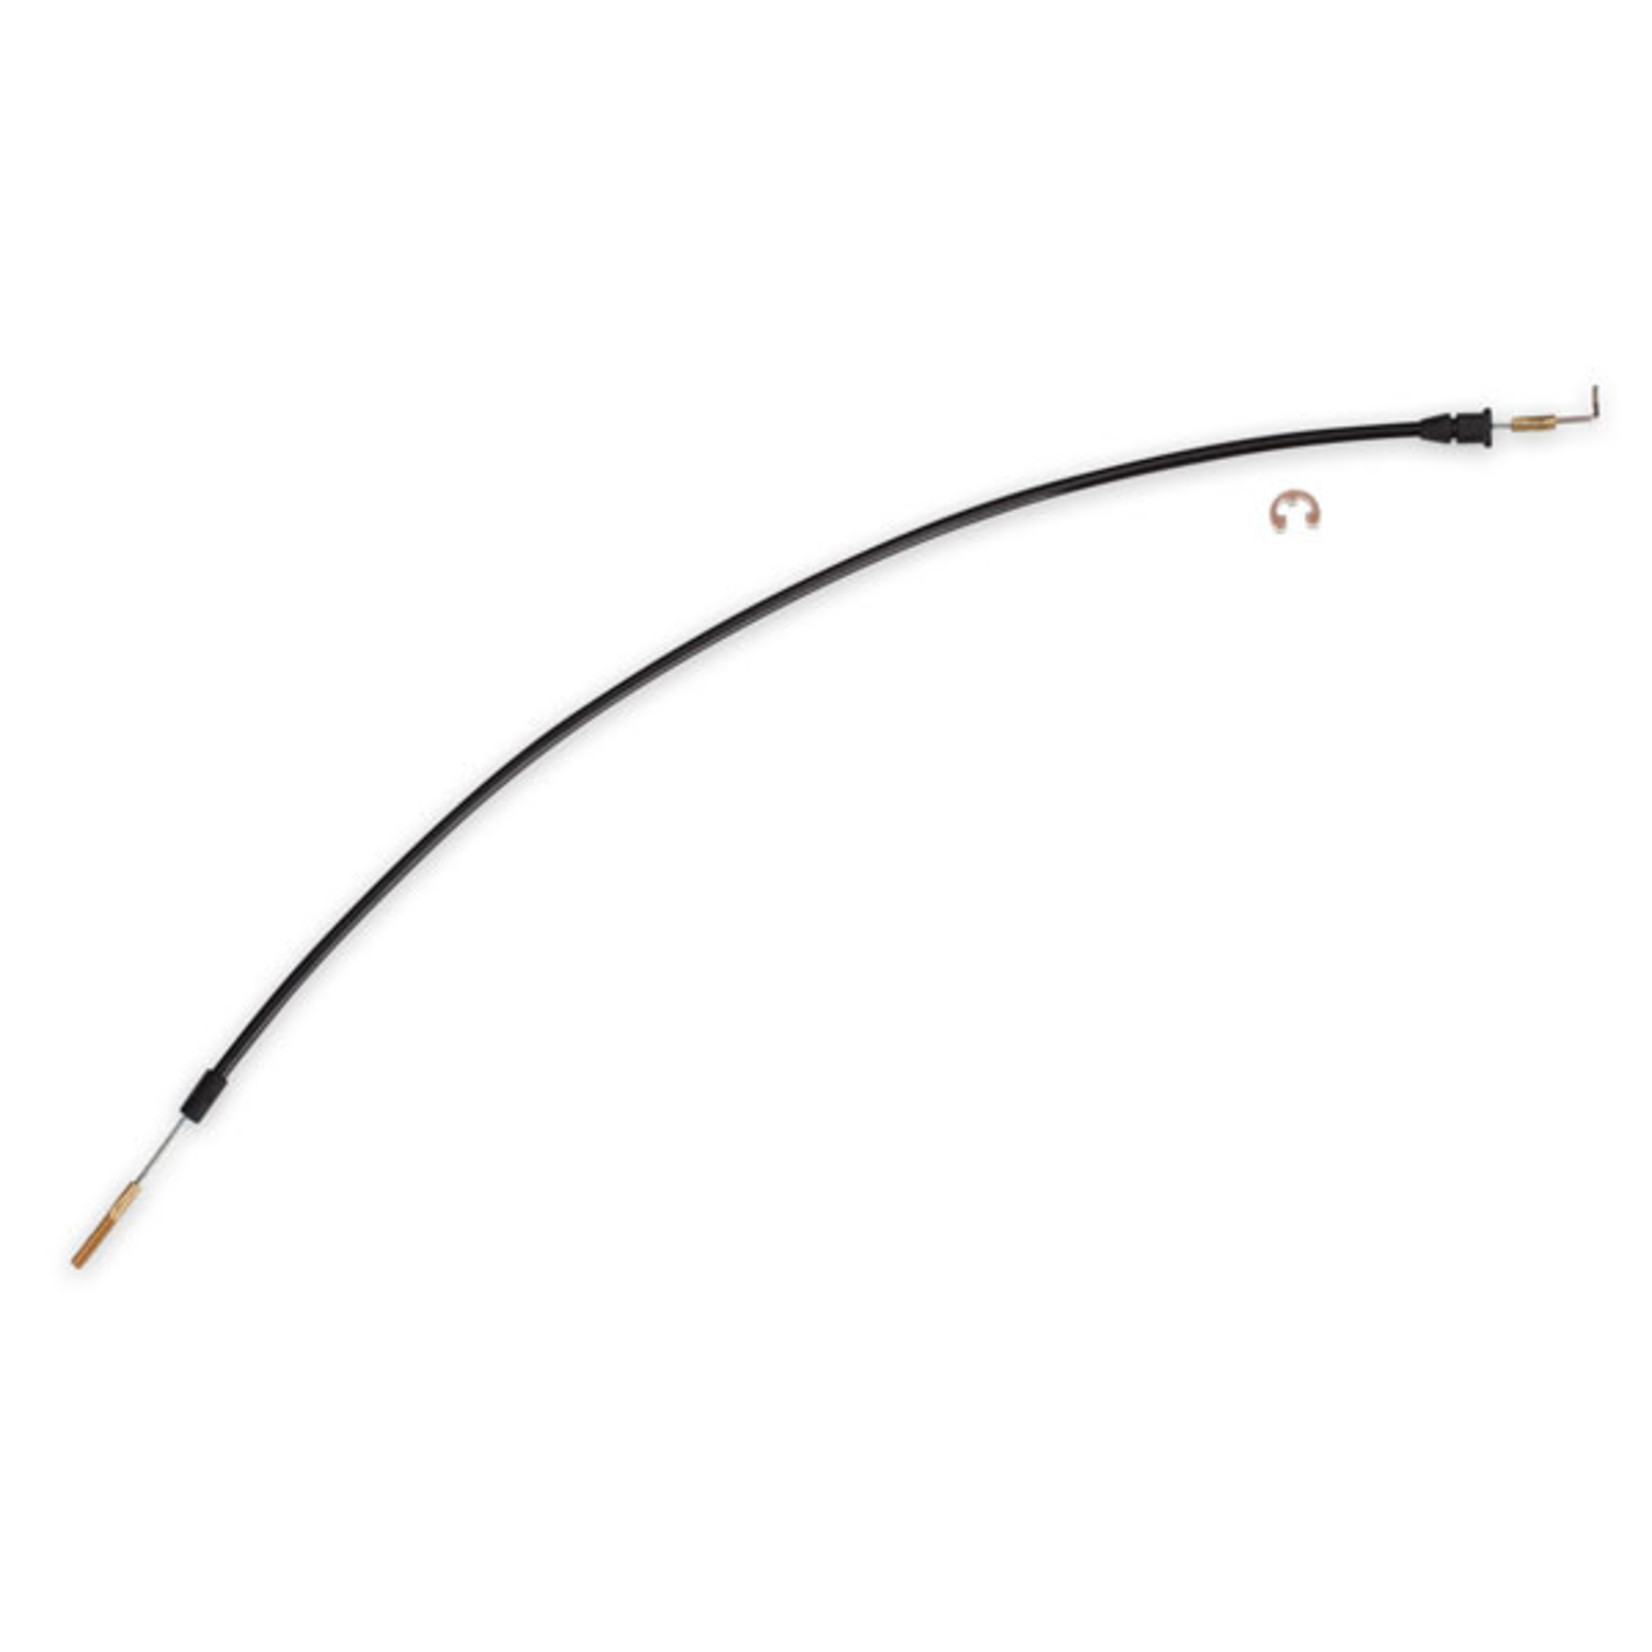 Traxxas 8148 - Cable, T-lock, extra long (193mm) (for use